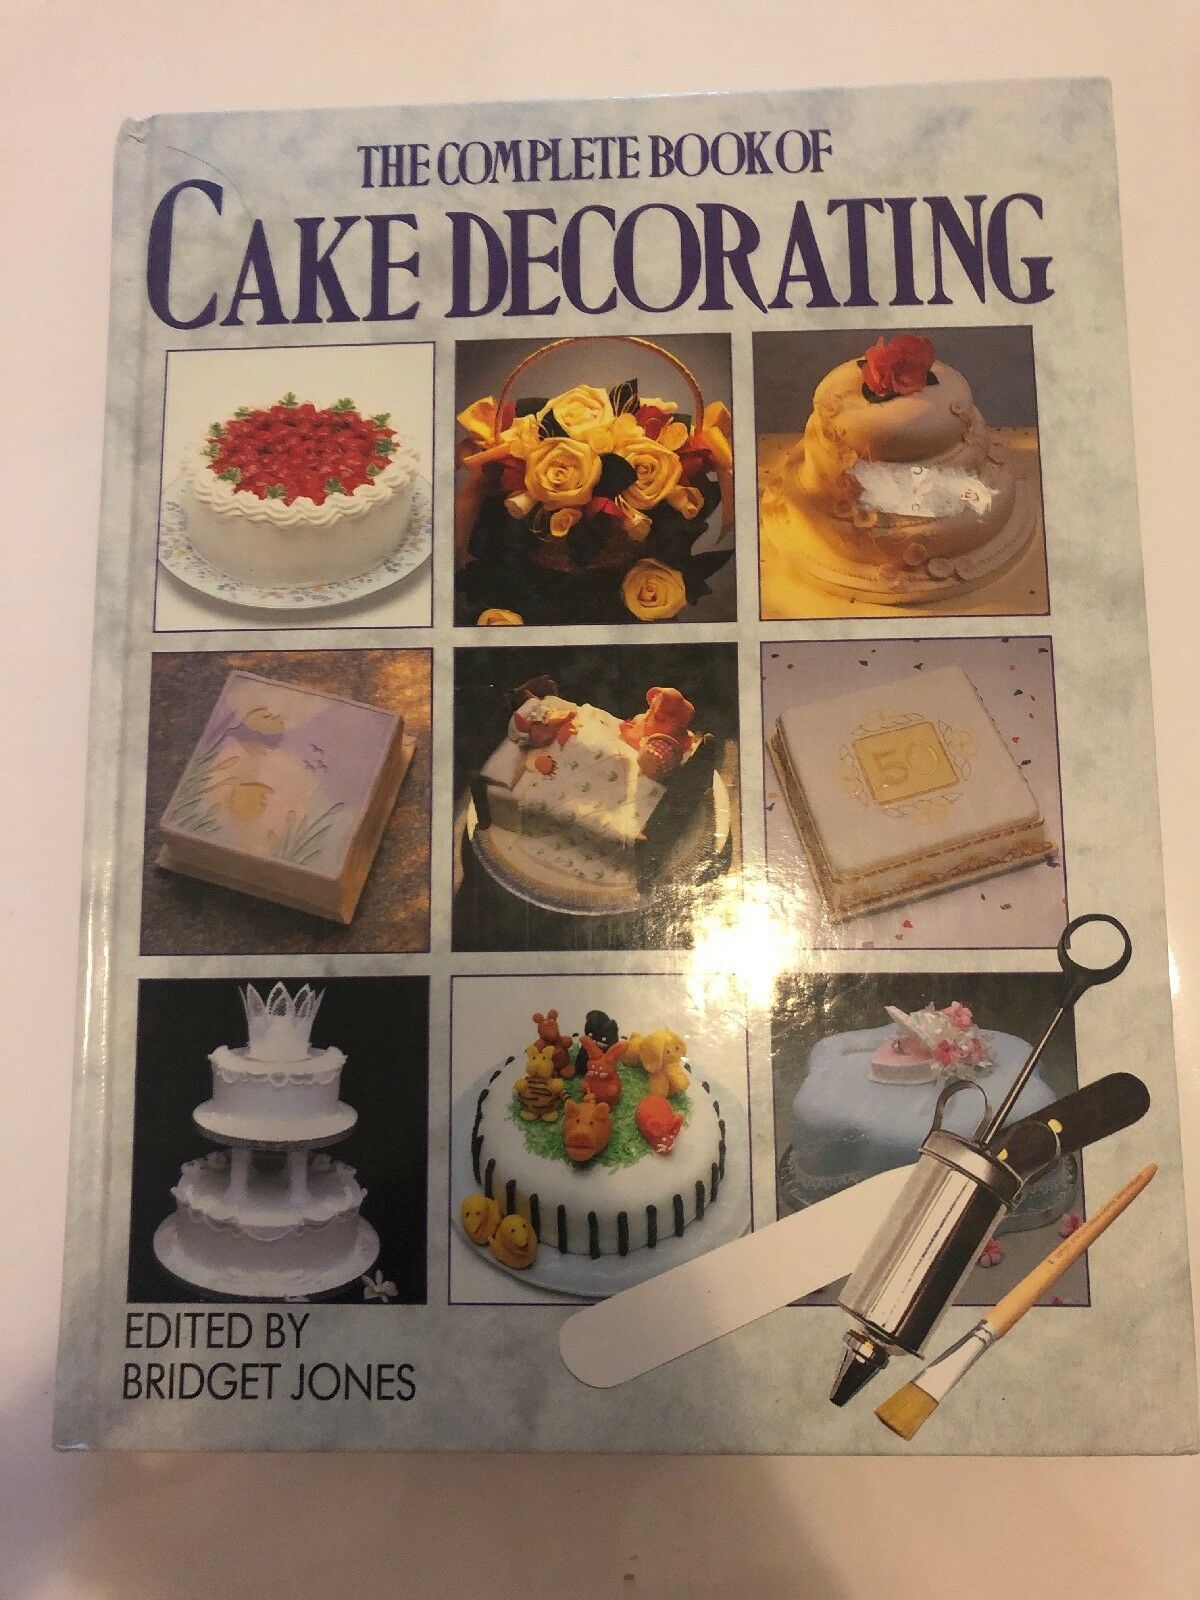 The Complete Book Of Cake Decorating by Bridget Jones 257 pages Hardcover 1990